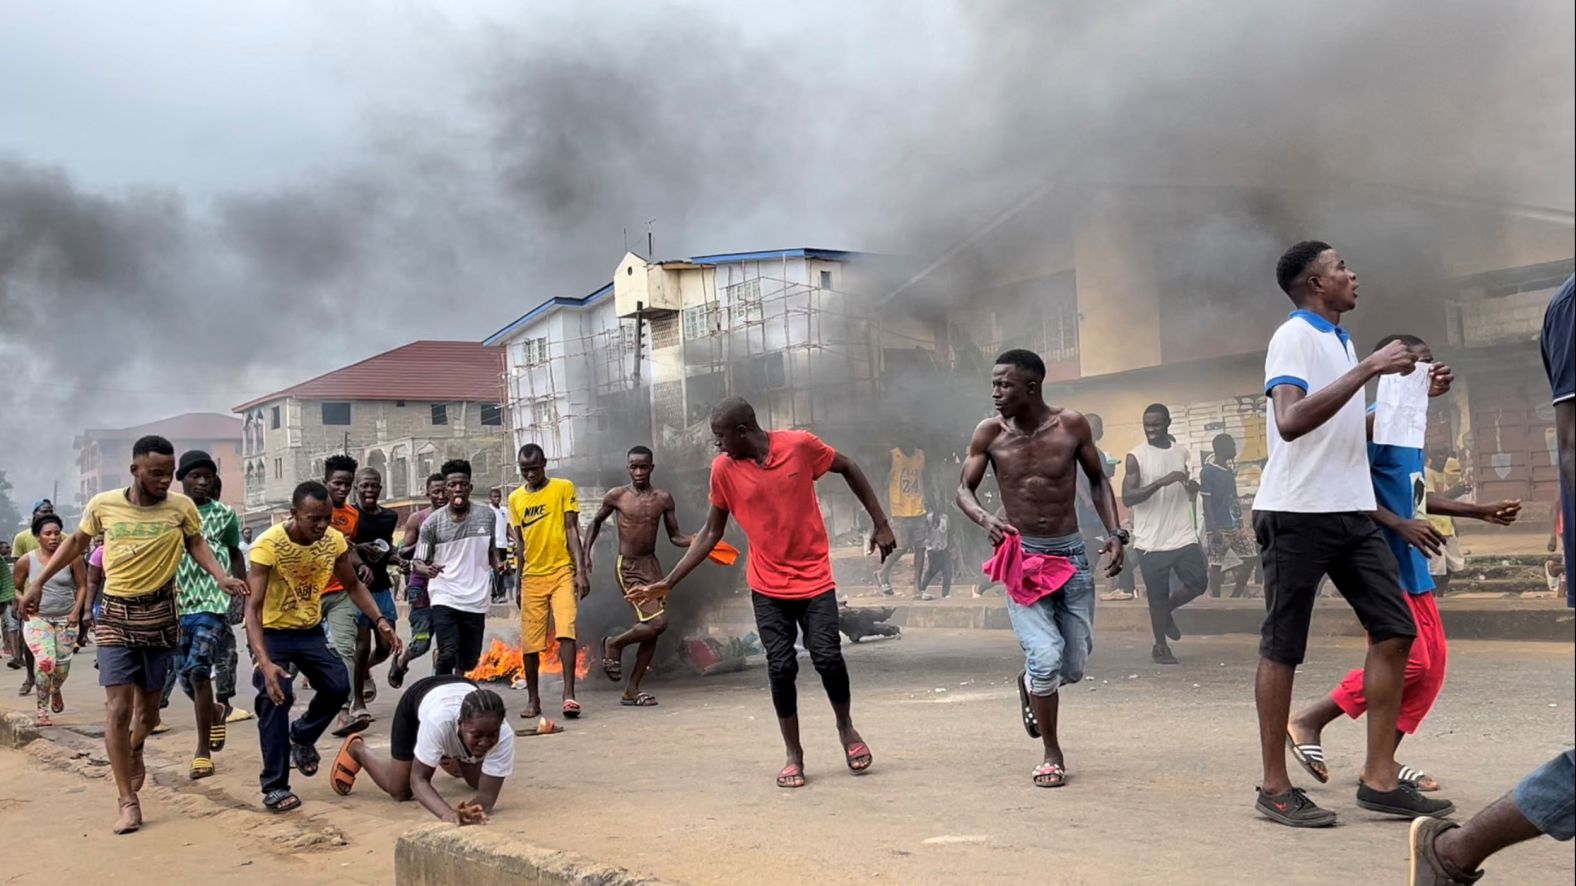 People run away during an anti-government protest in Freetown, Sierra Leone, on Wednesday, August 10. Hundreds of protesters took to the streets of the capital, protesting inflation and the rising cost of living in the West African country. <a href="https://www.cnn.com/2022/08/11/africa/eight-killed-sierra-leone-protest-intl/index.html" target="_blank">The protests grew violent at times, and there were casualties.</a> Eight police officers were killed, the country's youth minister told CNN on Thursday, while hospital sources told Reuters that at least 21 civilians were killed in different locations in the country.